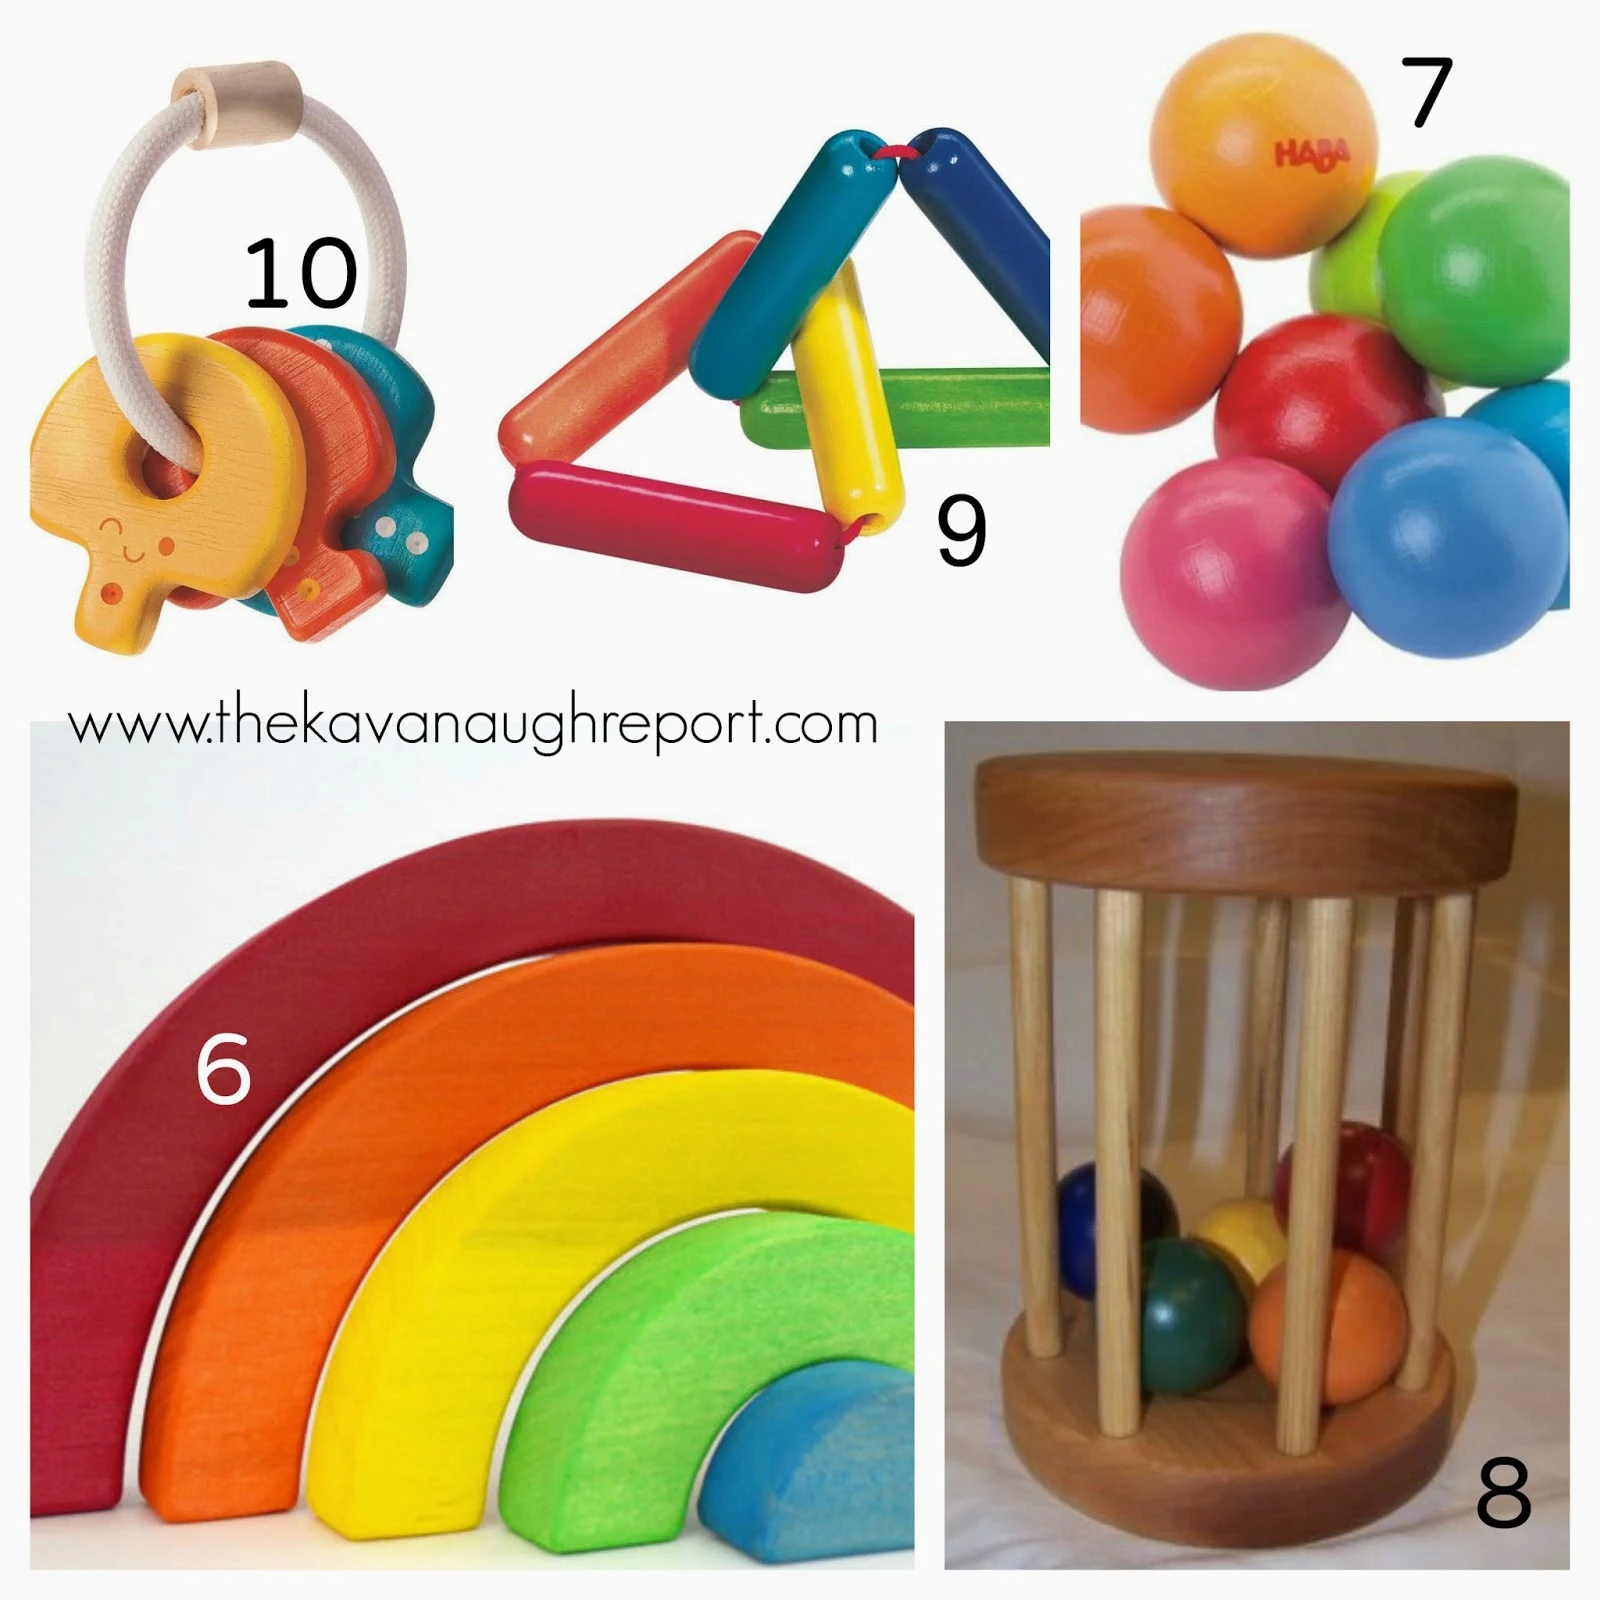 Purging traditional baby toys can be a great way to start Montessori. Here are some Montessori friendly options to consider instead of traditional baby toys.